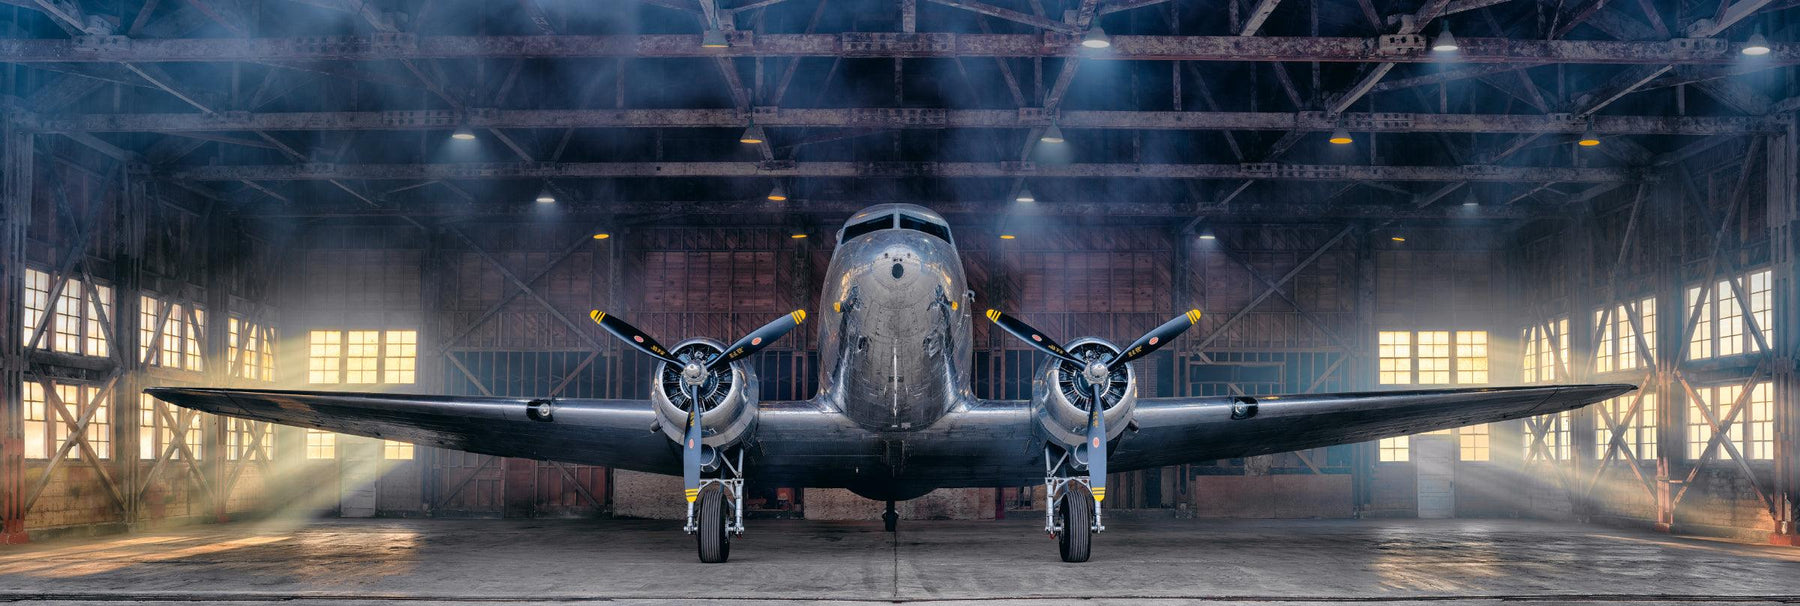 Silver DC-3 airplane in an open metal hanger with sun shining in the windows